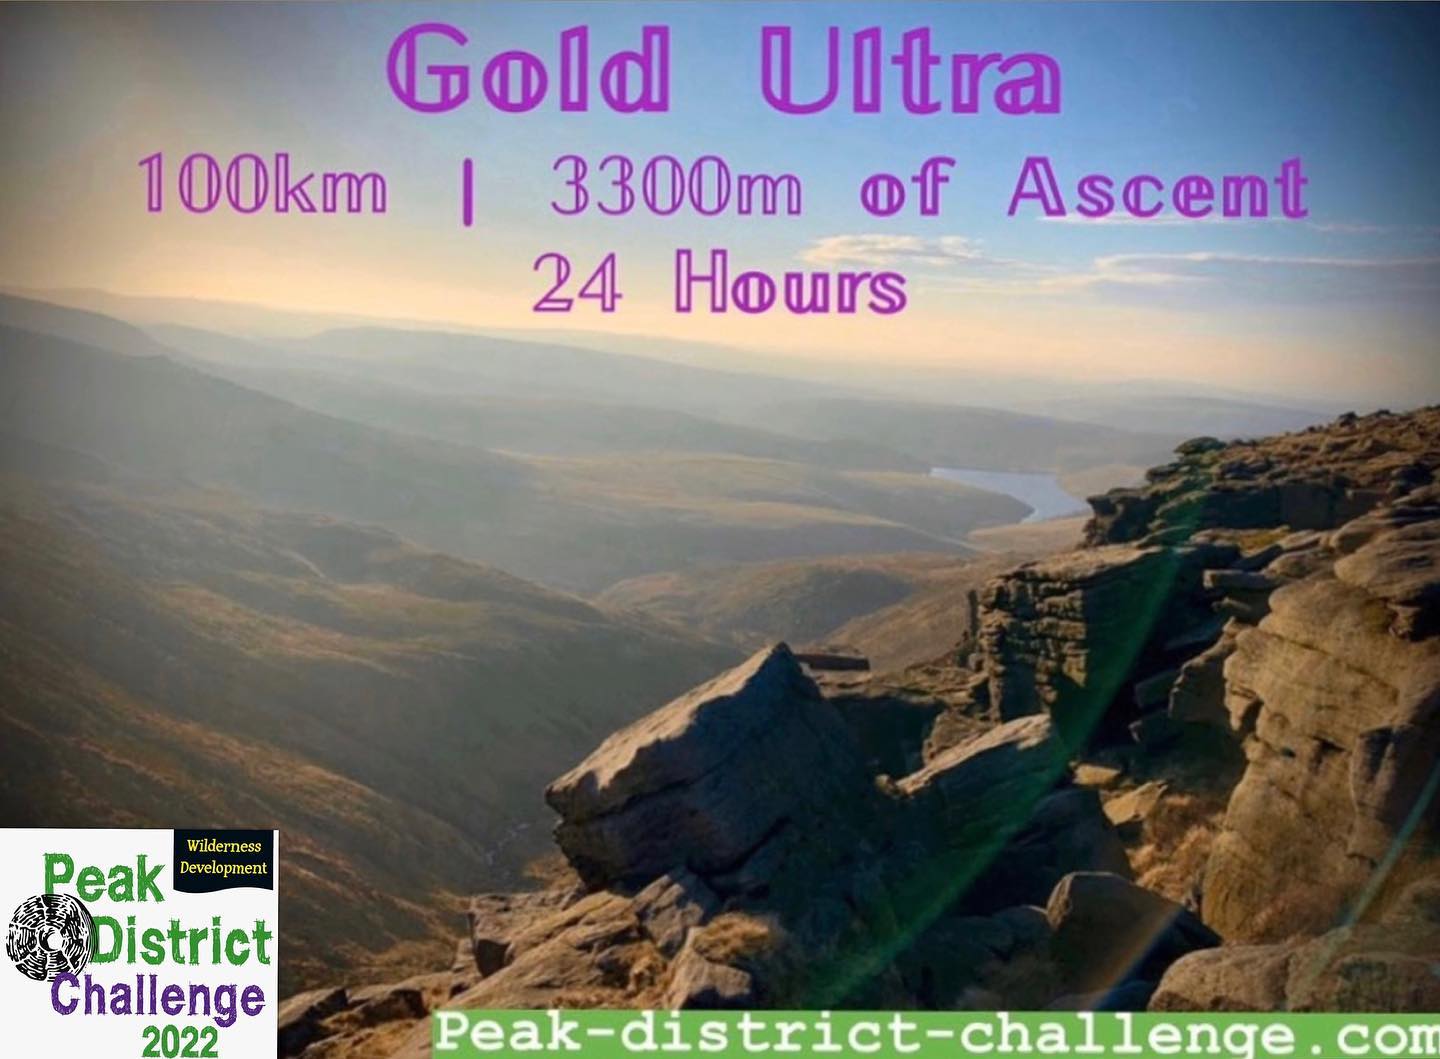 Register now for the Peak-District-Challenge.com 100km Gold Ultra Challenge for only £72 in total...